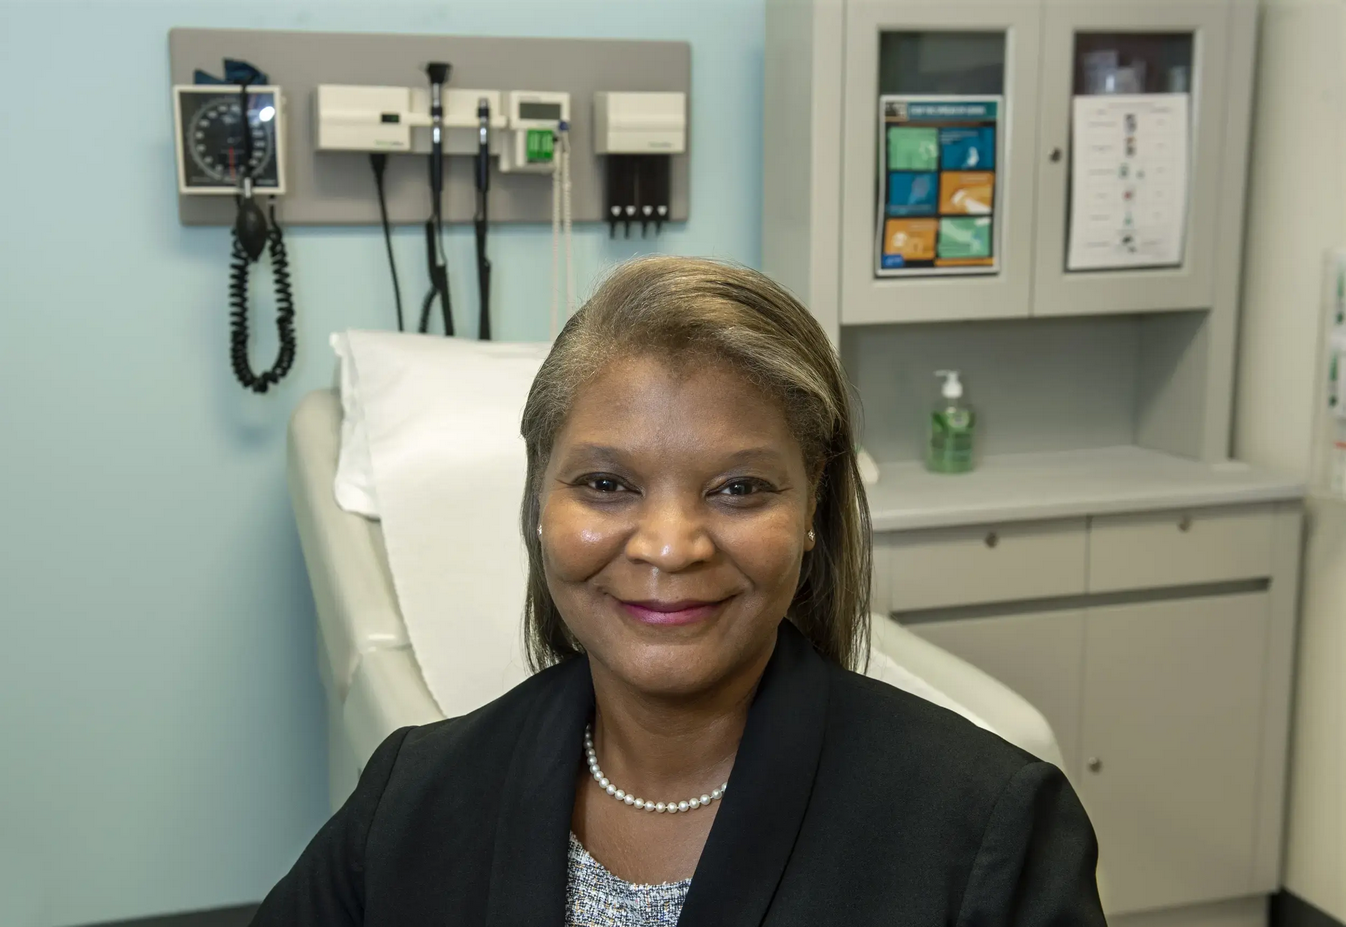 A woman wearing a suit jacket smiling in an exam room